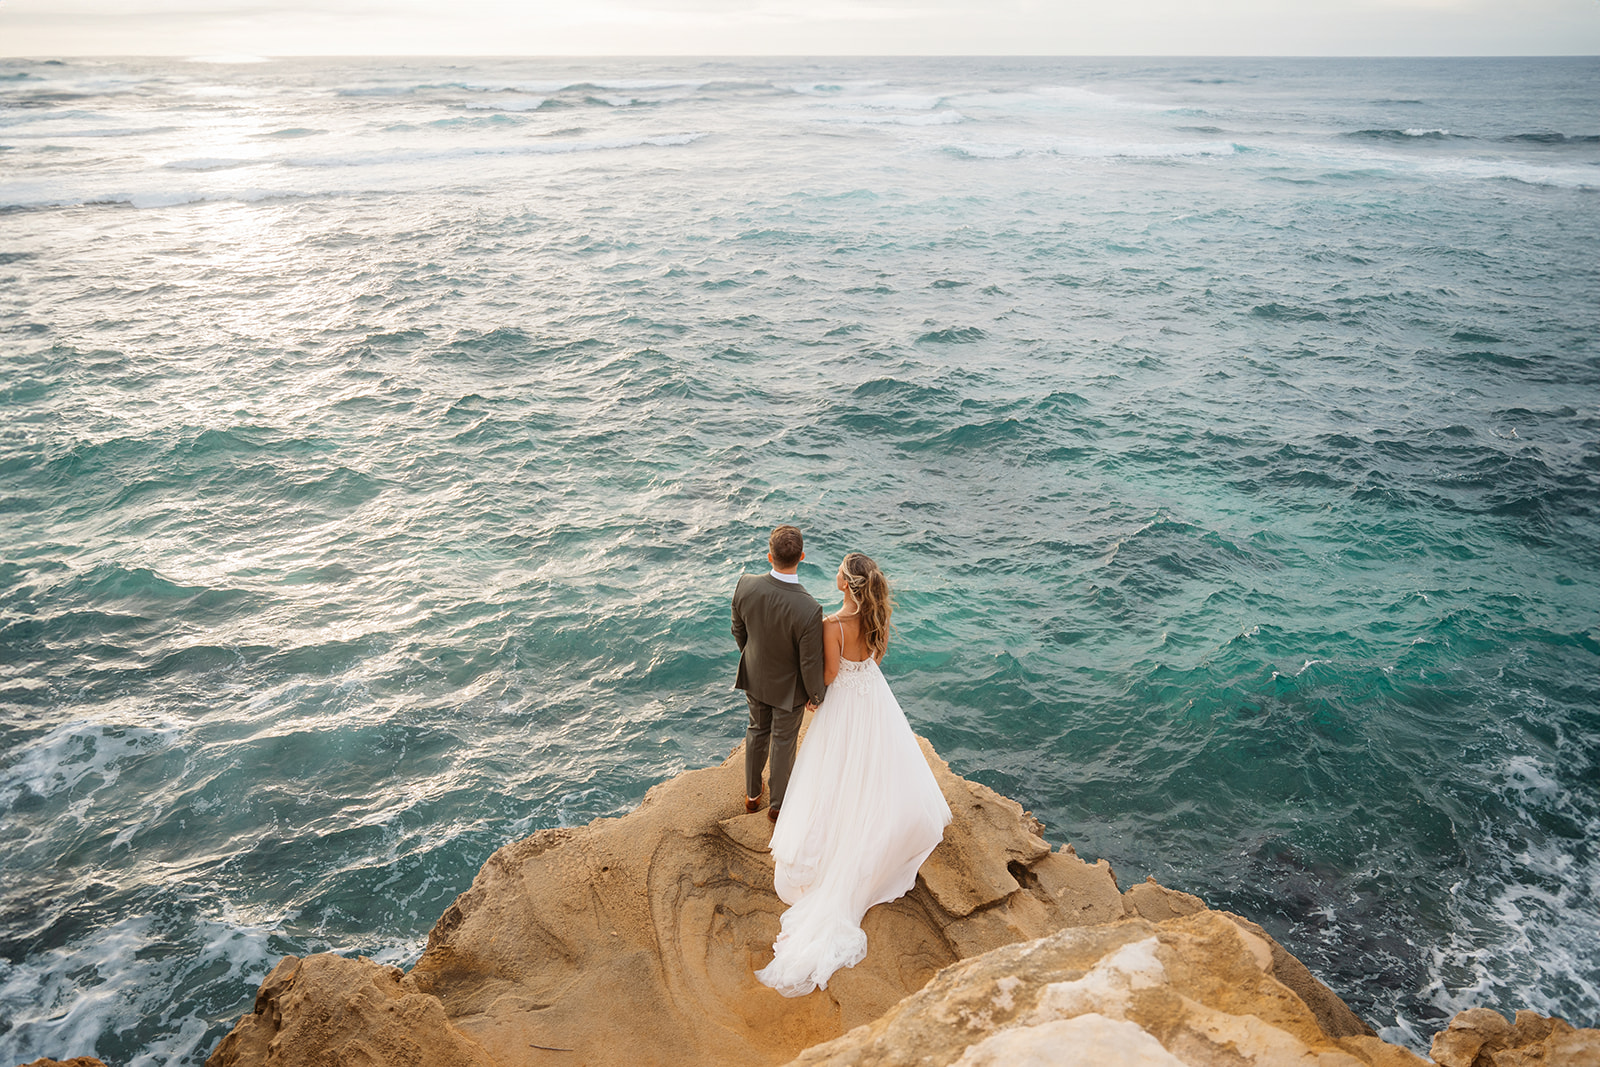 A couple who eloped on Kauai look out at blue water on a cliff near Shipwreck beach.